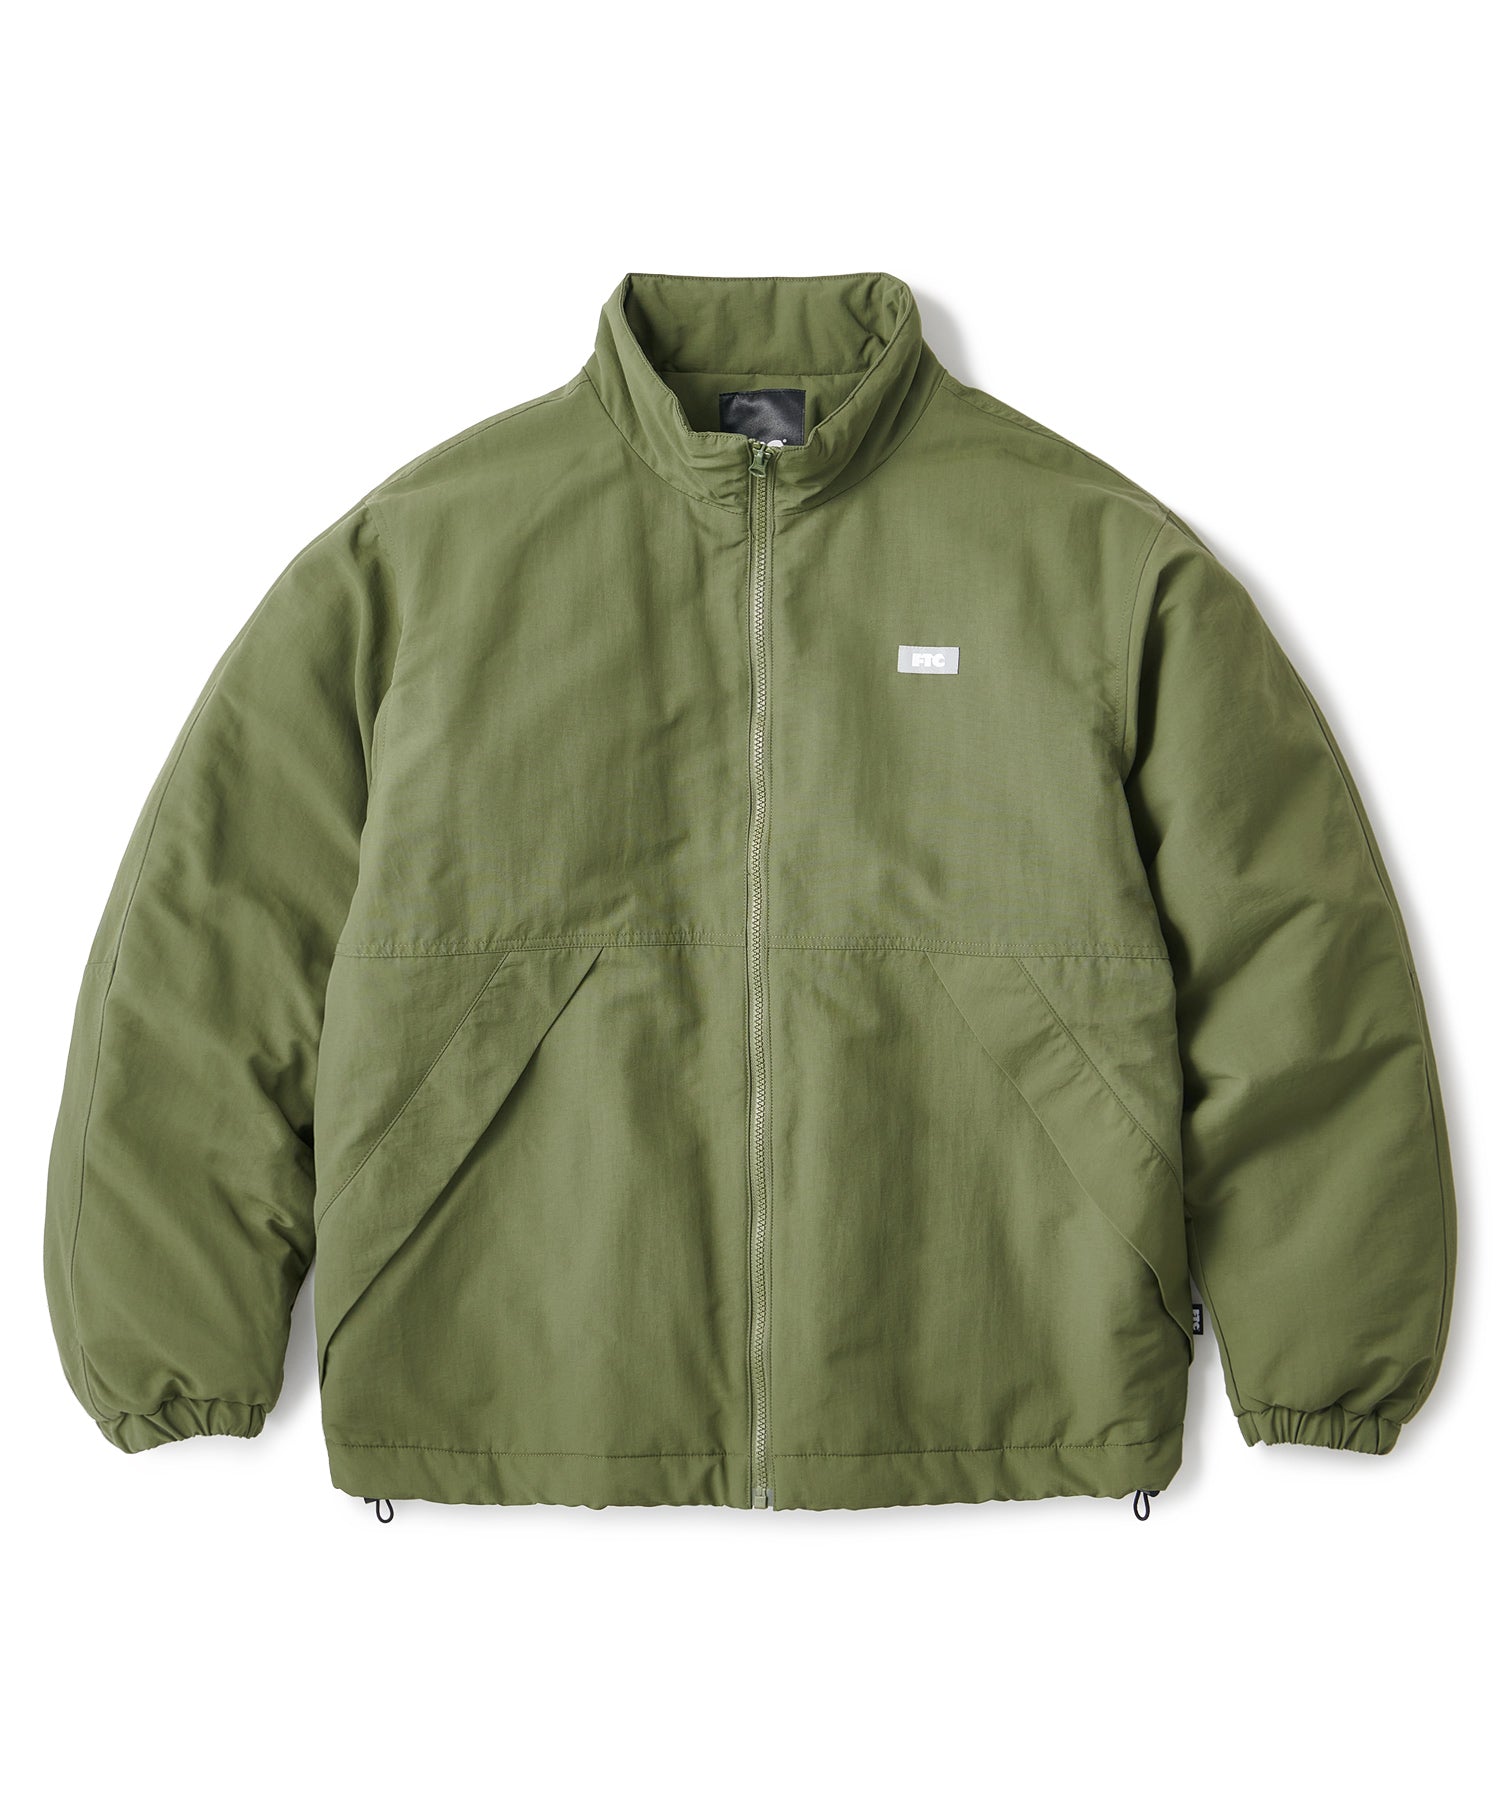 FTC FUR LINED COACH JACKET GREEN